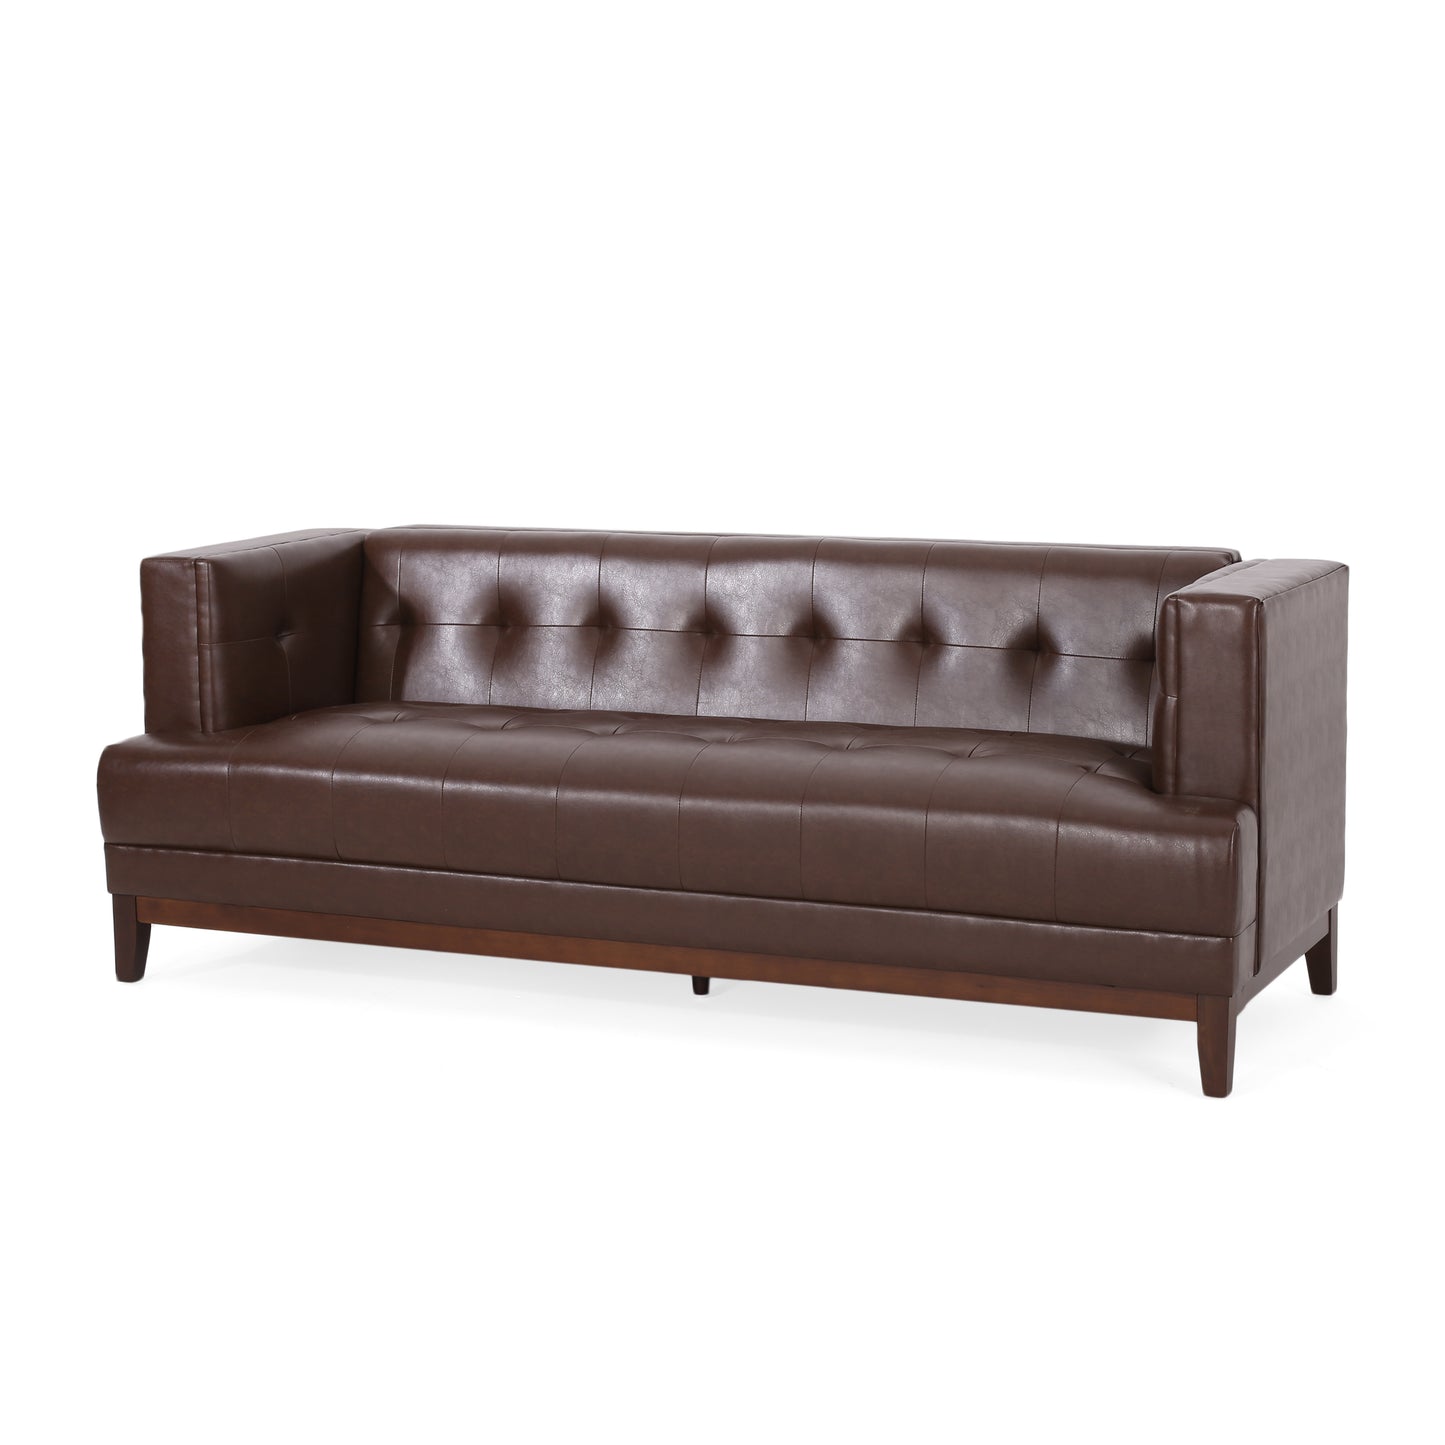 Stefan Mid Century Modern Faux Leather Tufted 3 Seater Sofa